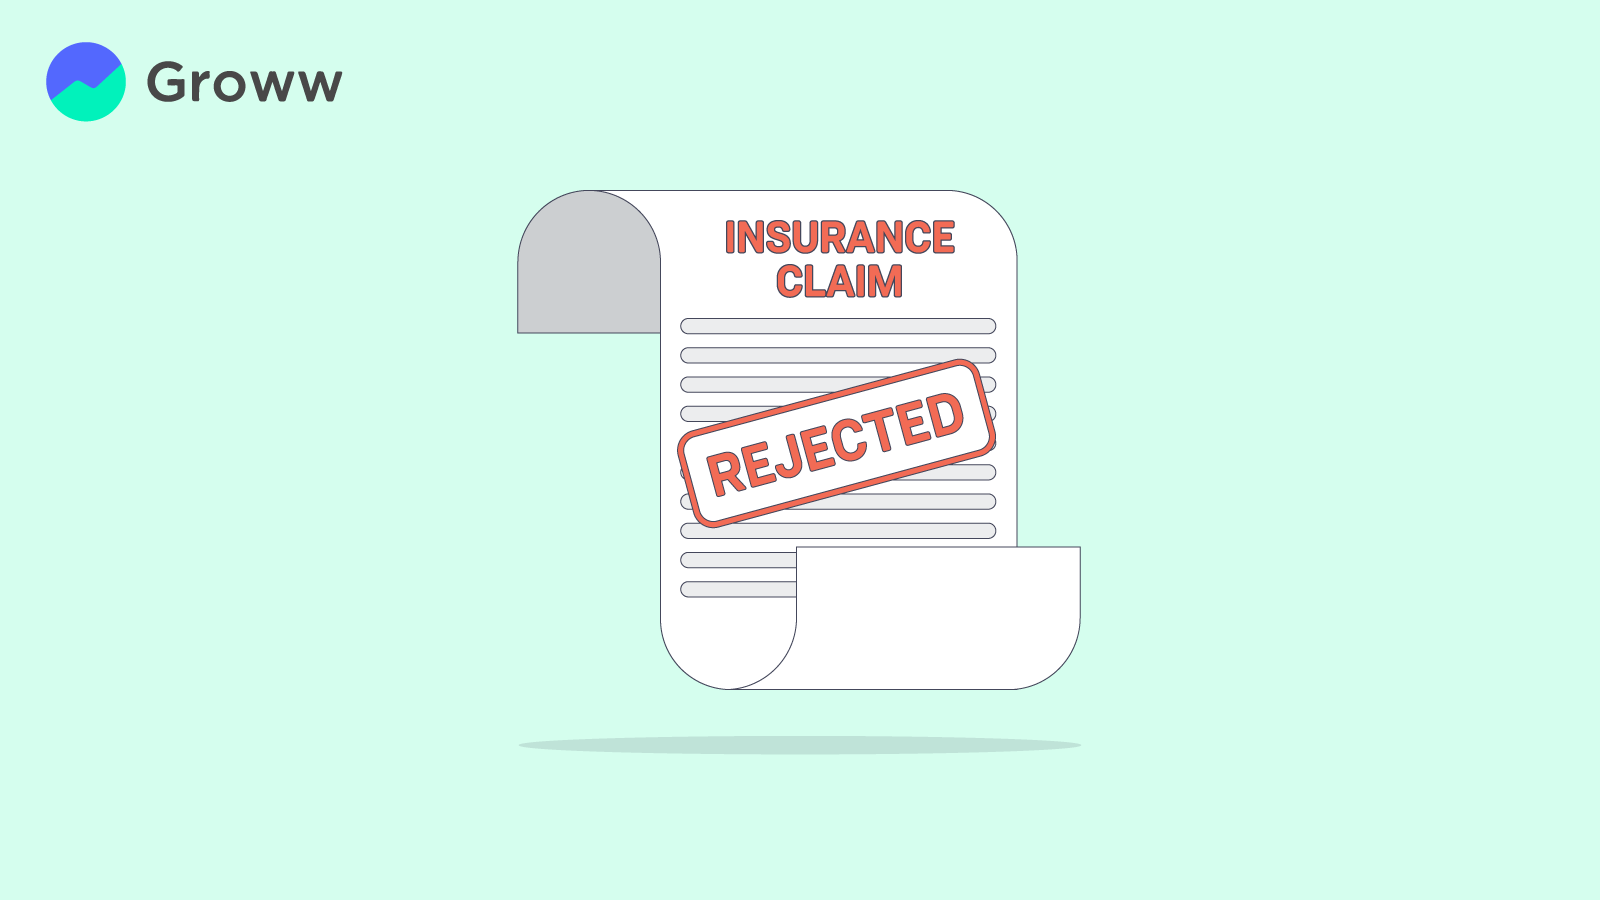 Top Reasons for Life Insurance Claim Rejection